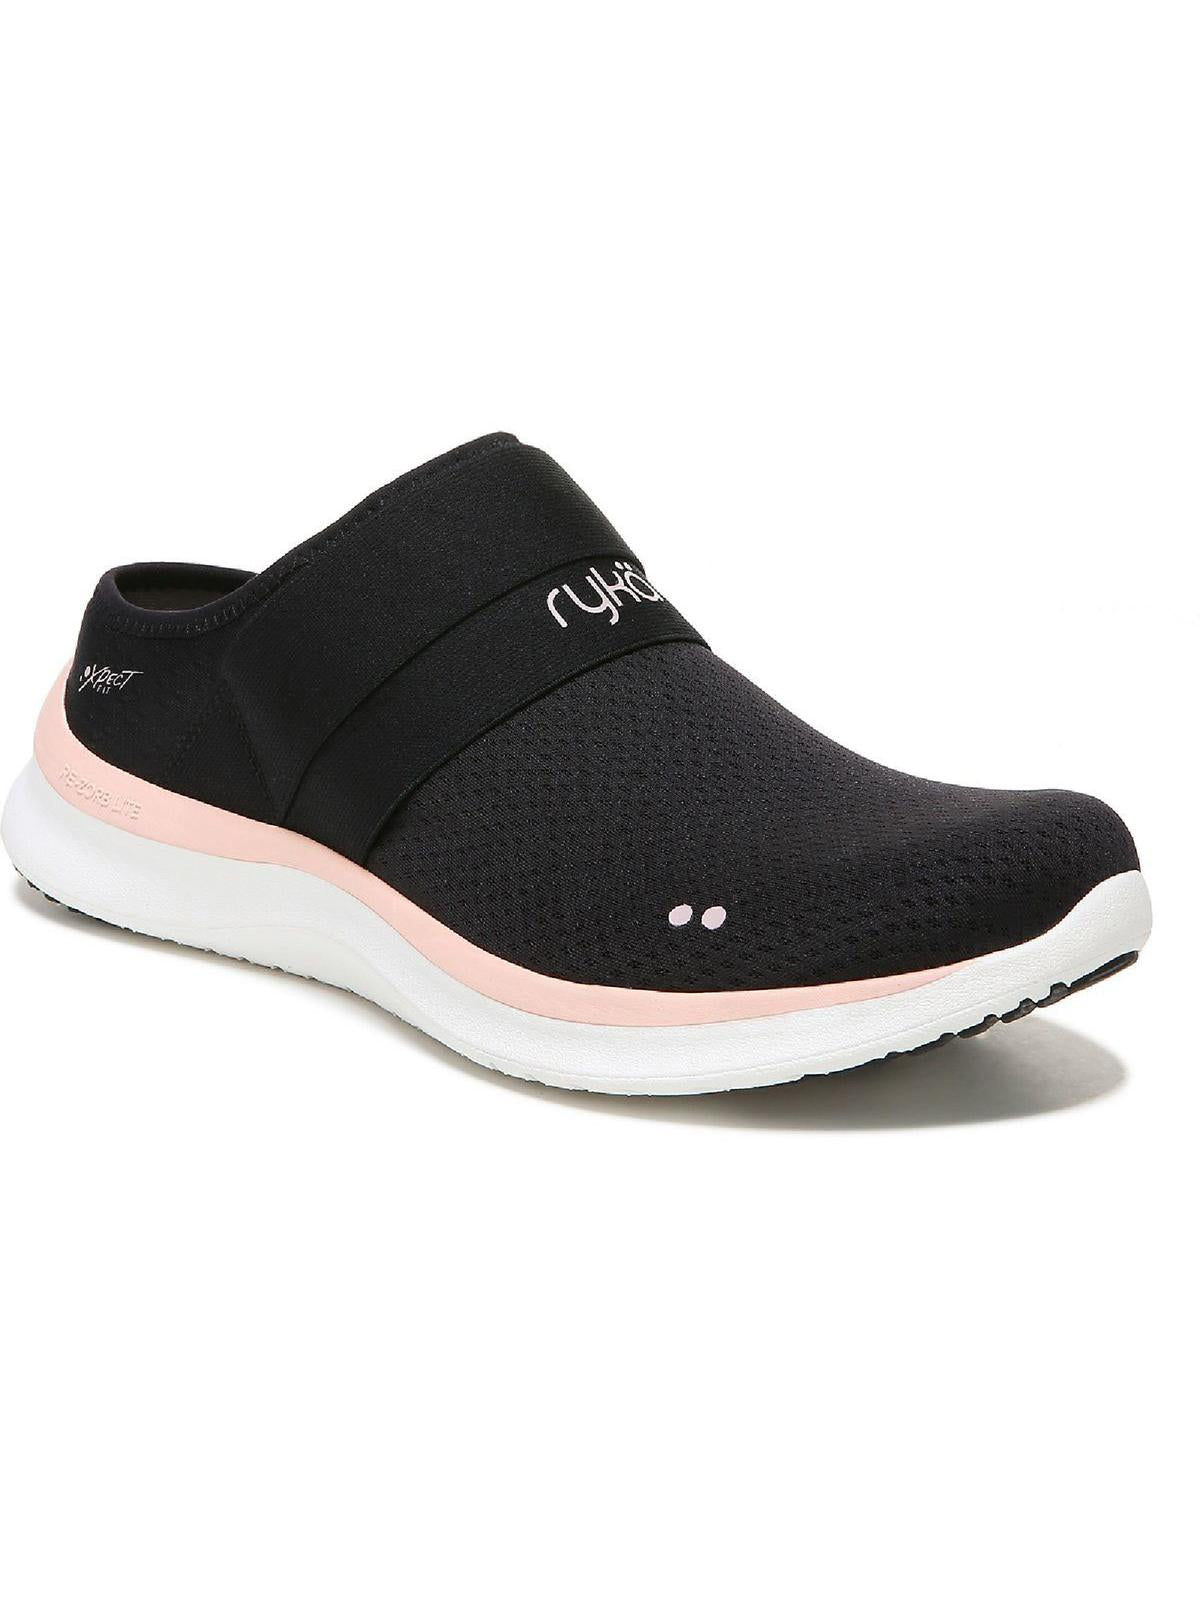 Ryka Laid Back Womens Fitness Lifestyle Slip-on Sneakers In Black